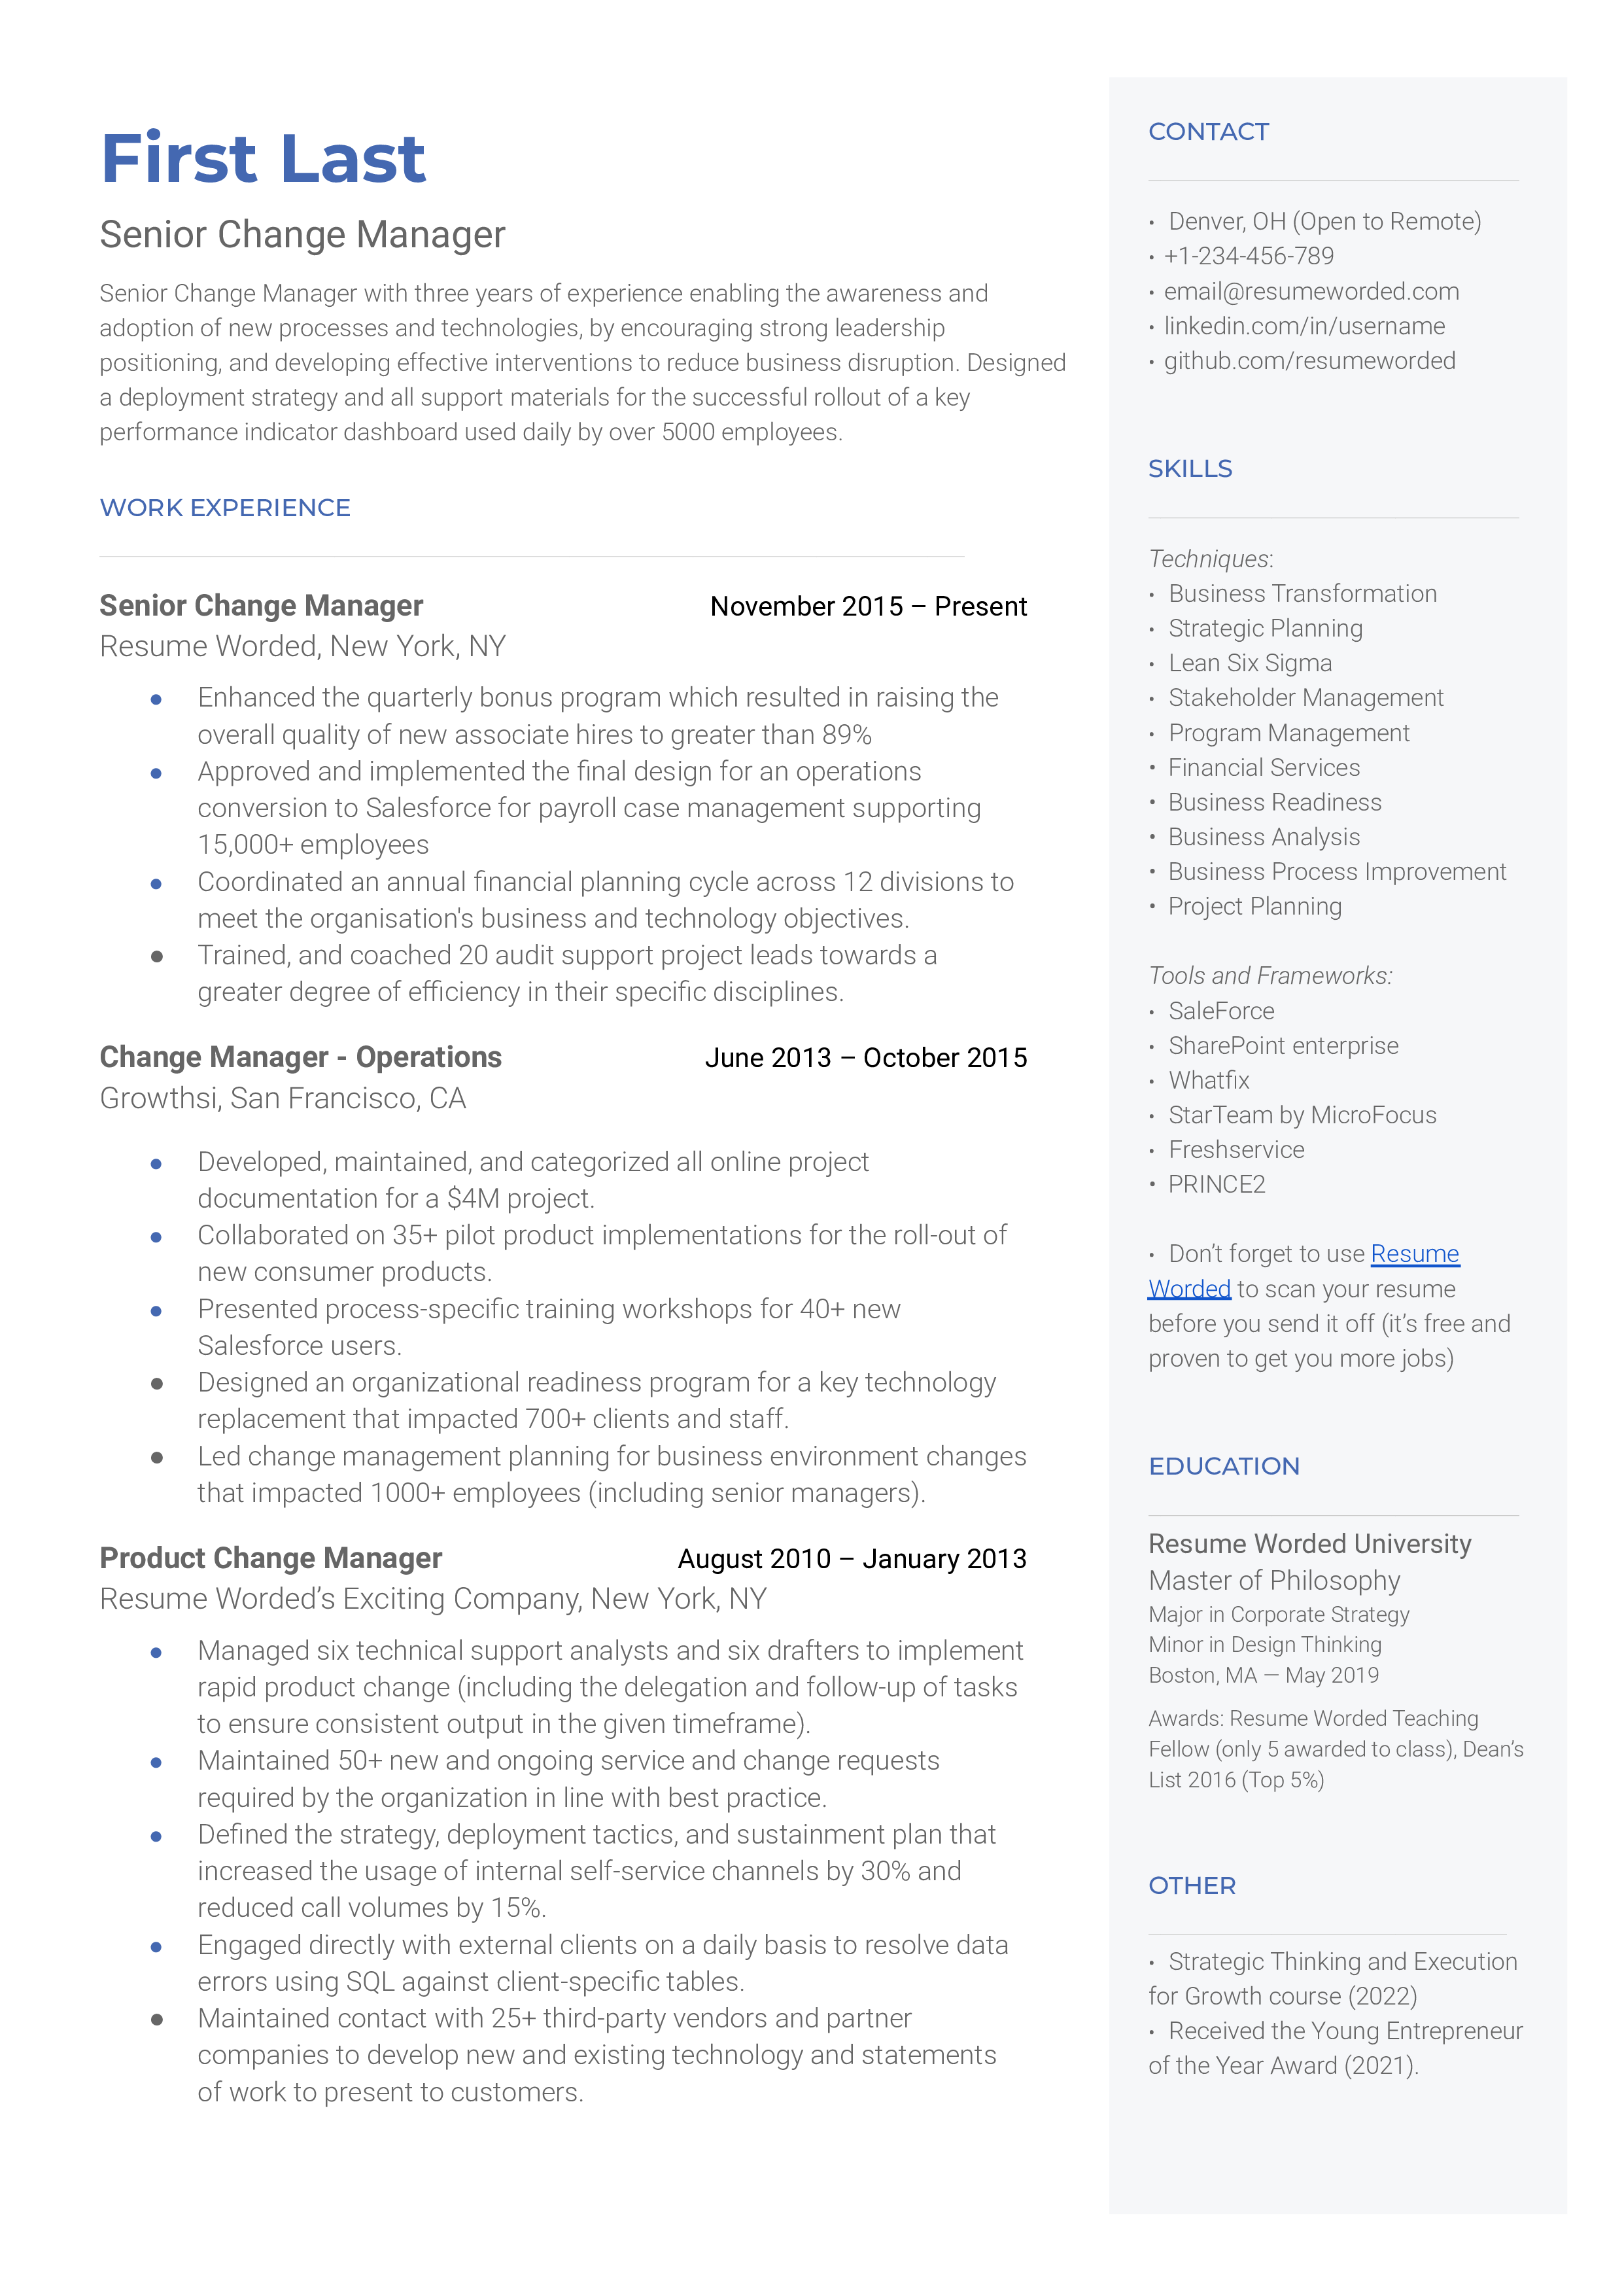 A senior change manager resume sample with an extensive skills set and highlights the applicant's leadership experience.